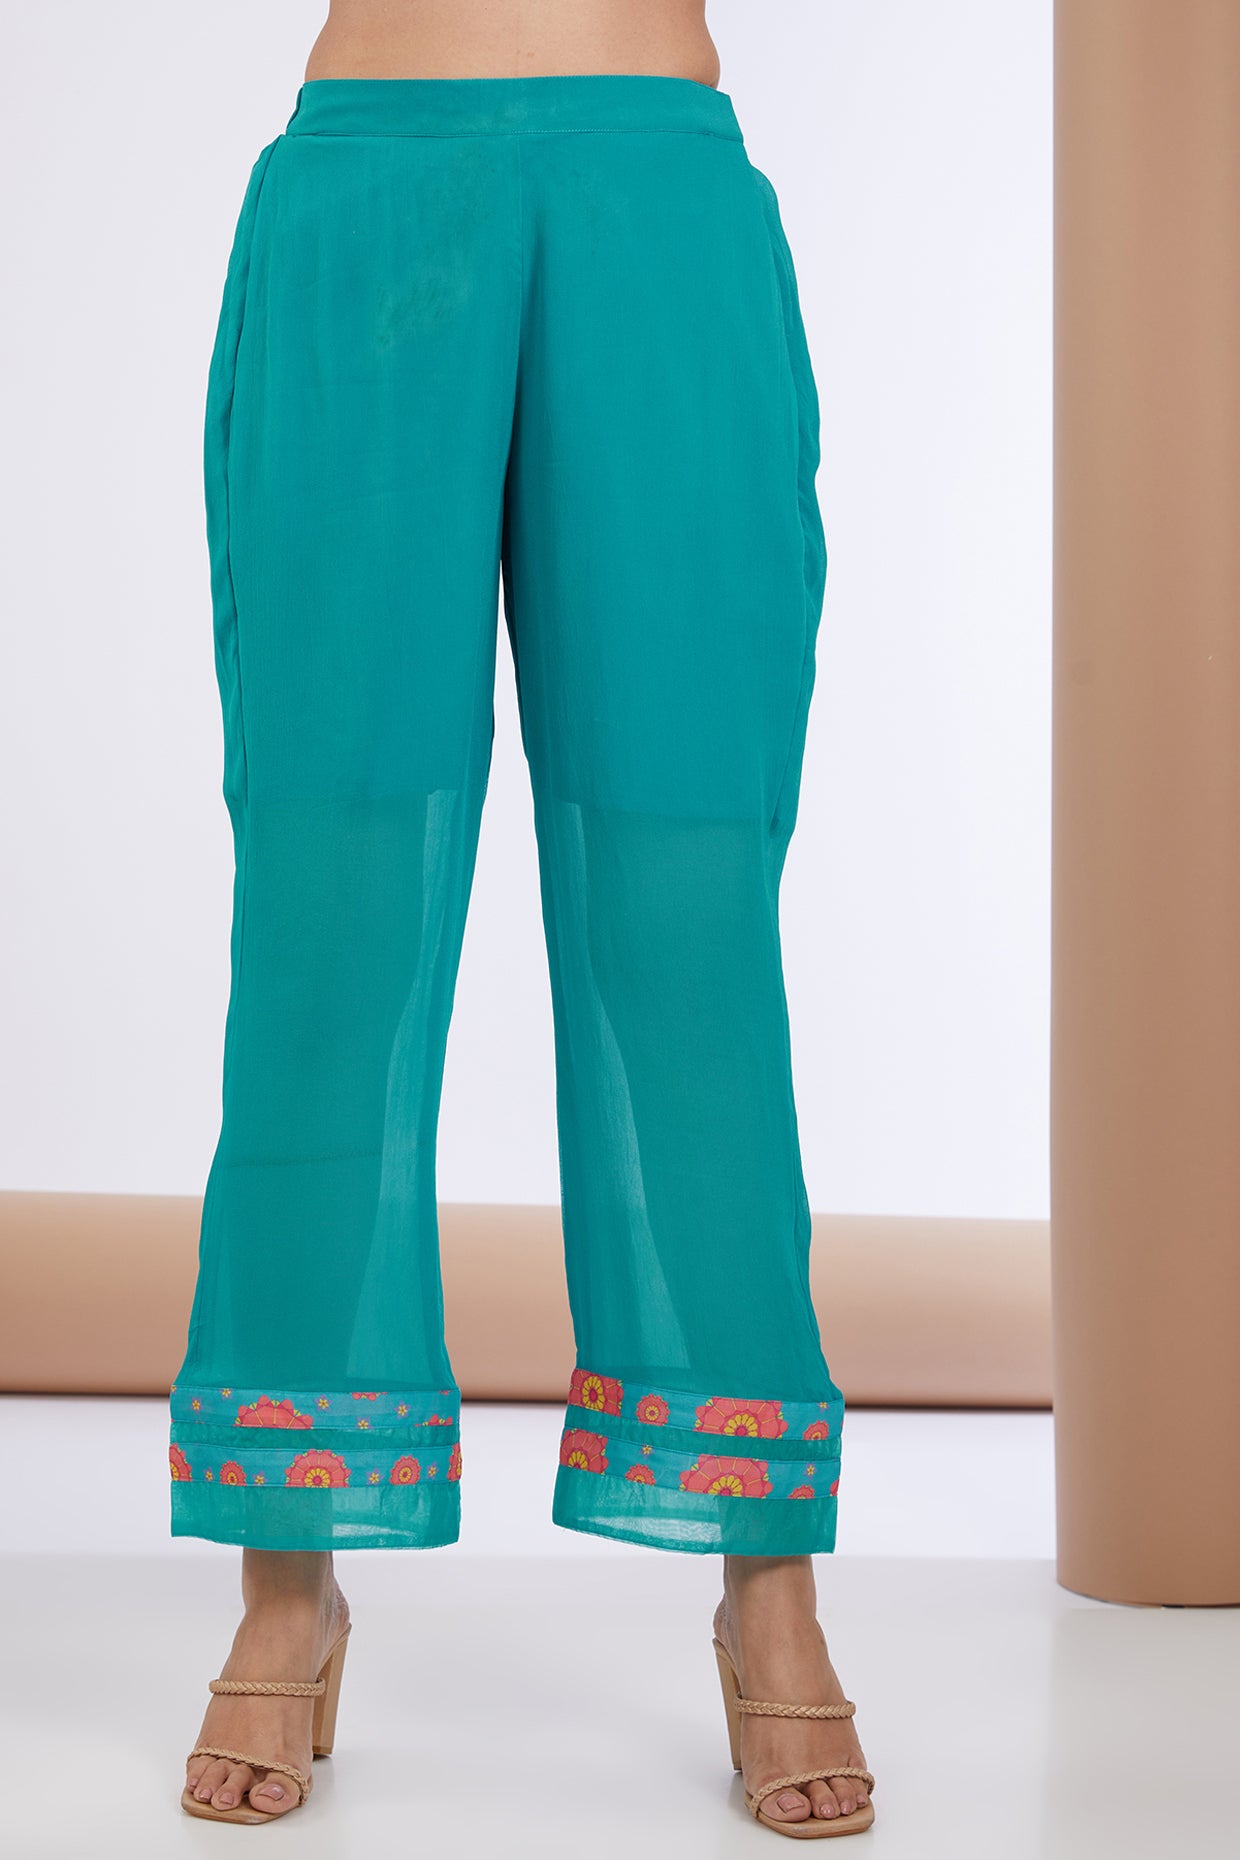 Light Blue Pleated Palazzo Pants Design by First Resort by Ramola Bachchan  at Pernia's Pop Up Shop 2024